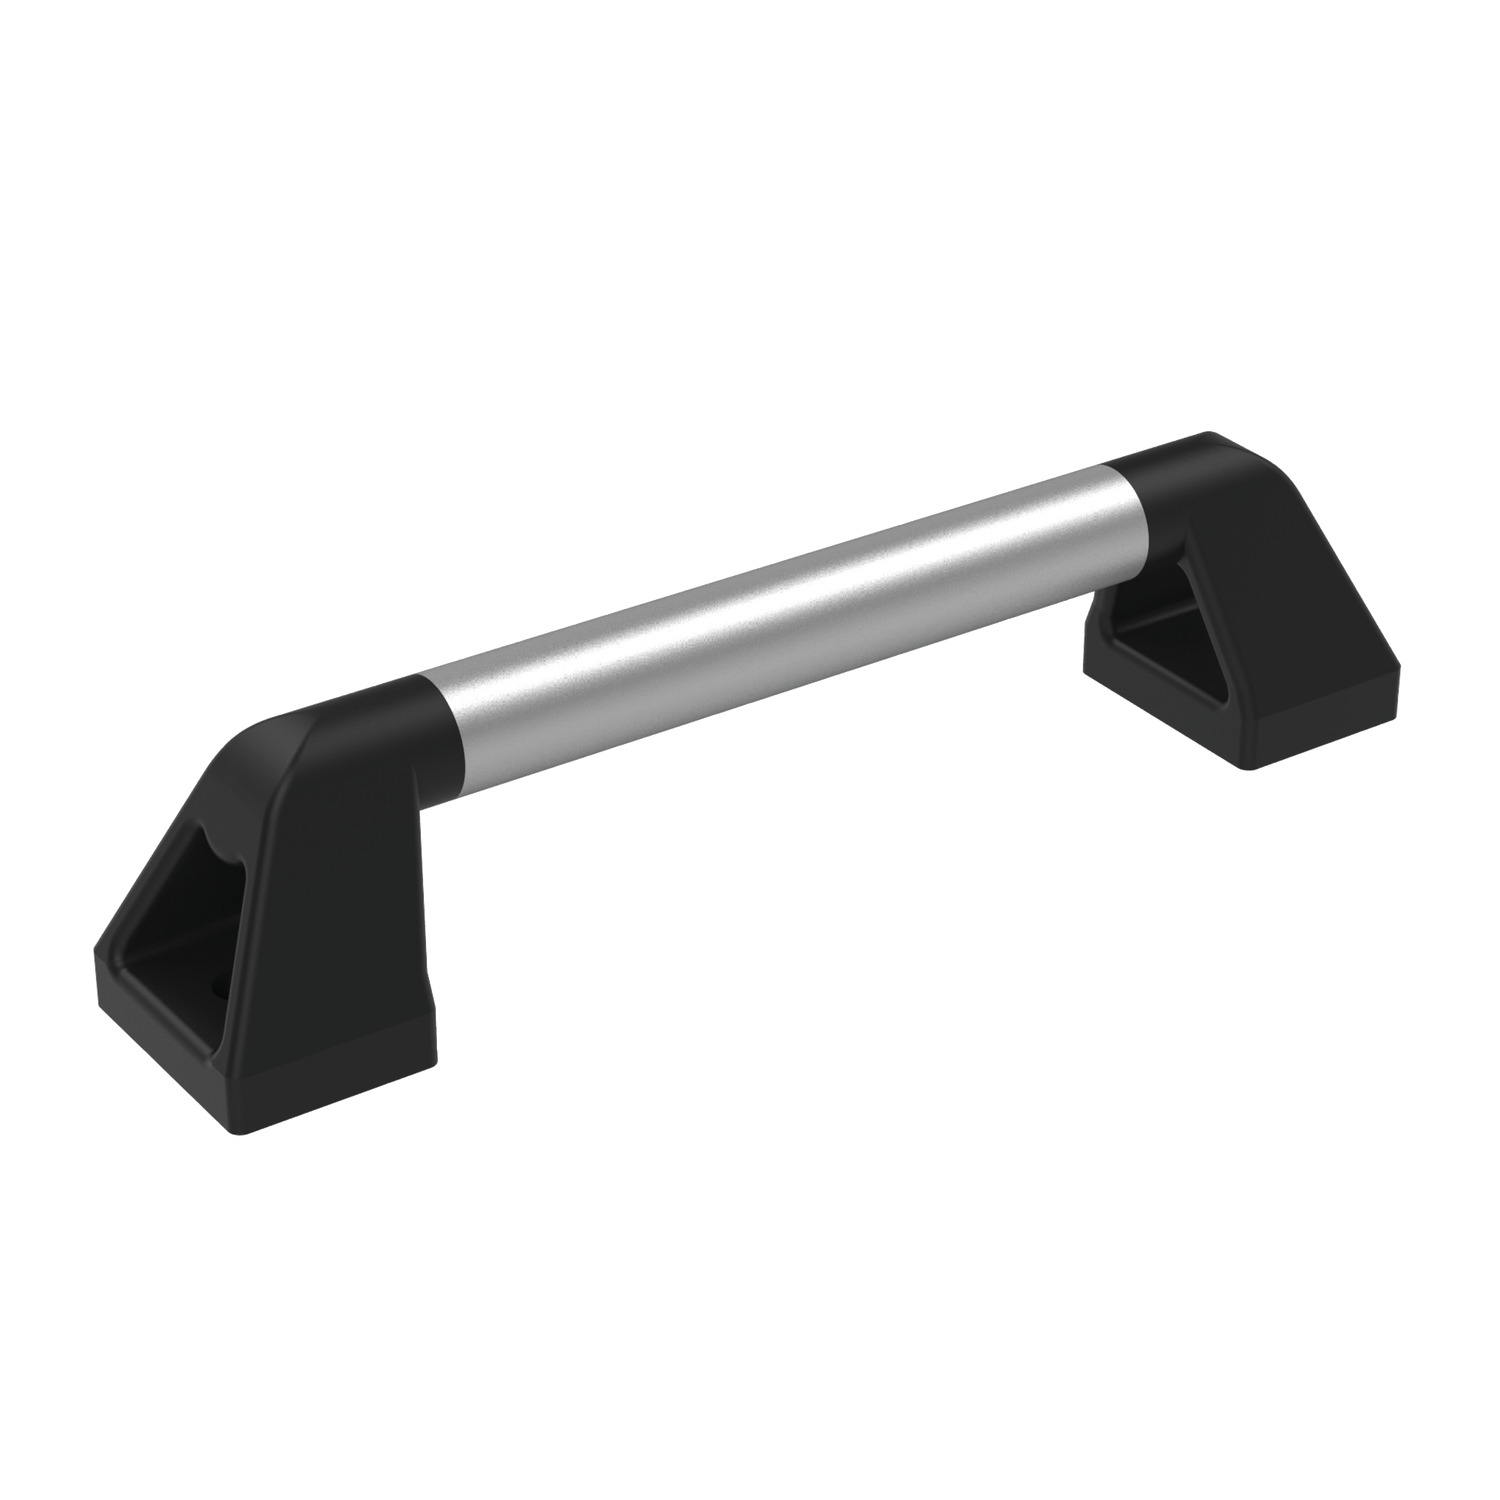 79420.W0301 Pull Handle - Heavy Duty - Thermoplastic Rear Mounting - 300 - 350